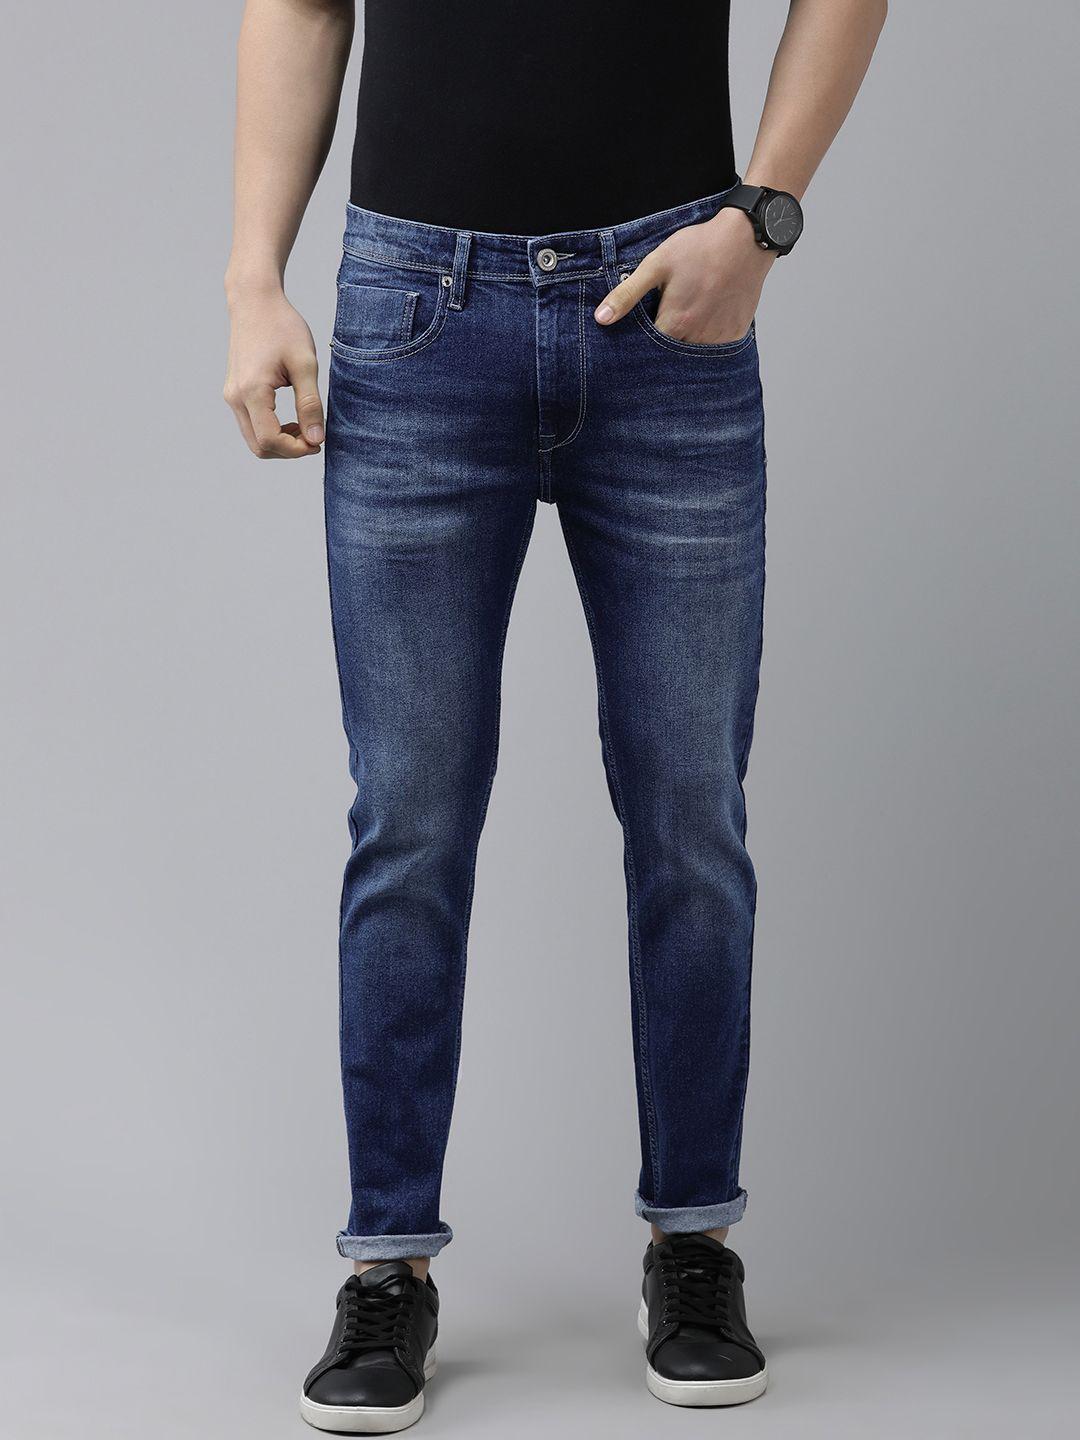 beat london by pepe jeans men blue chinox regular fit light fade stretchable jeans